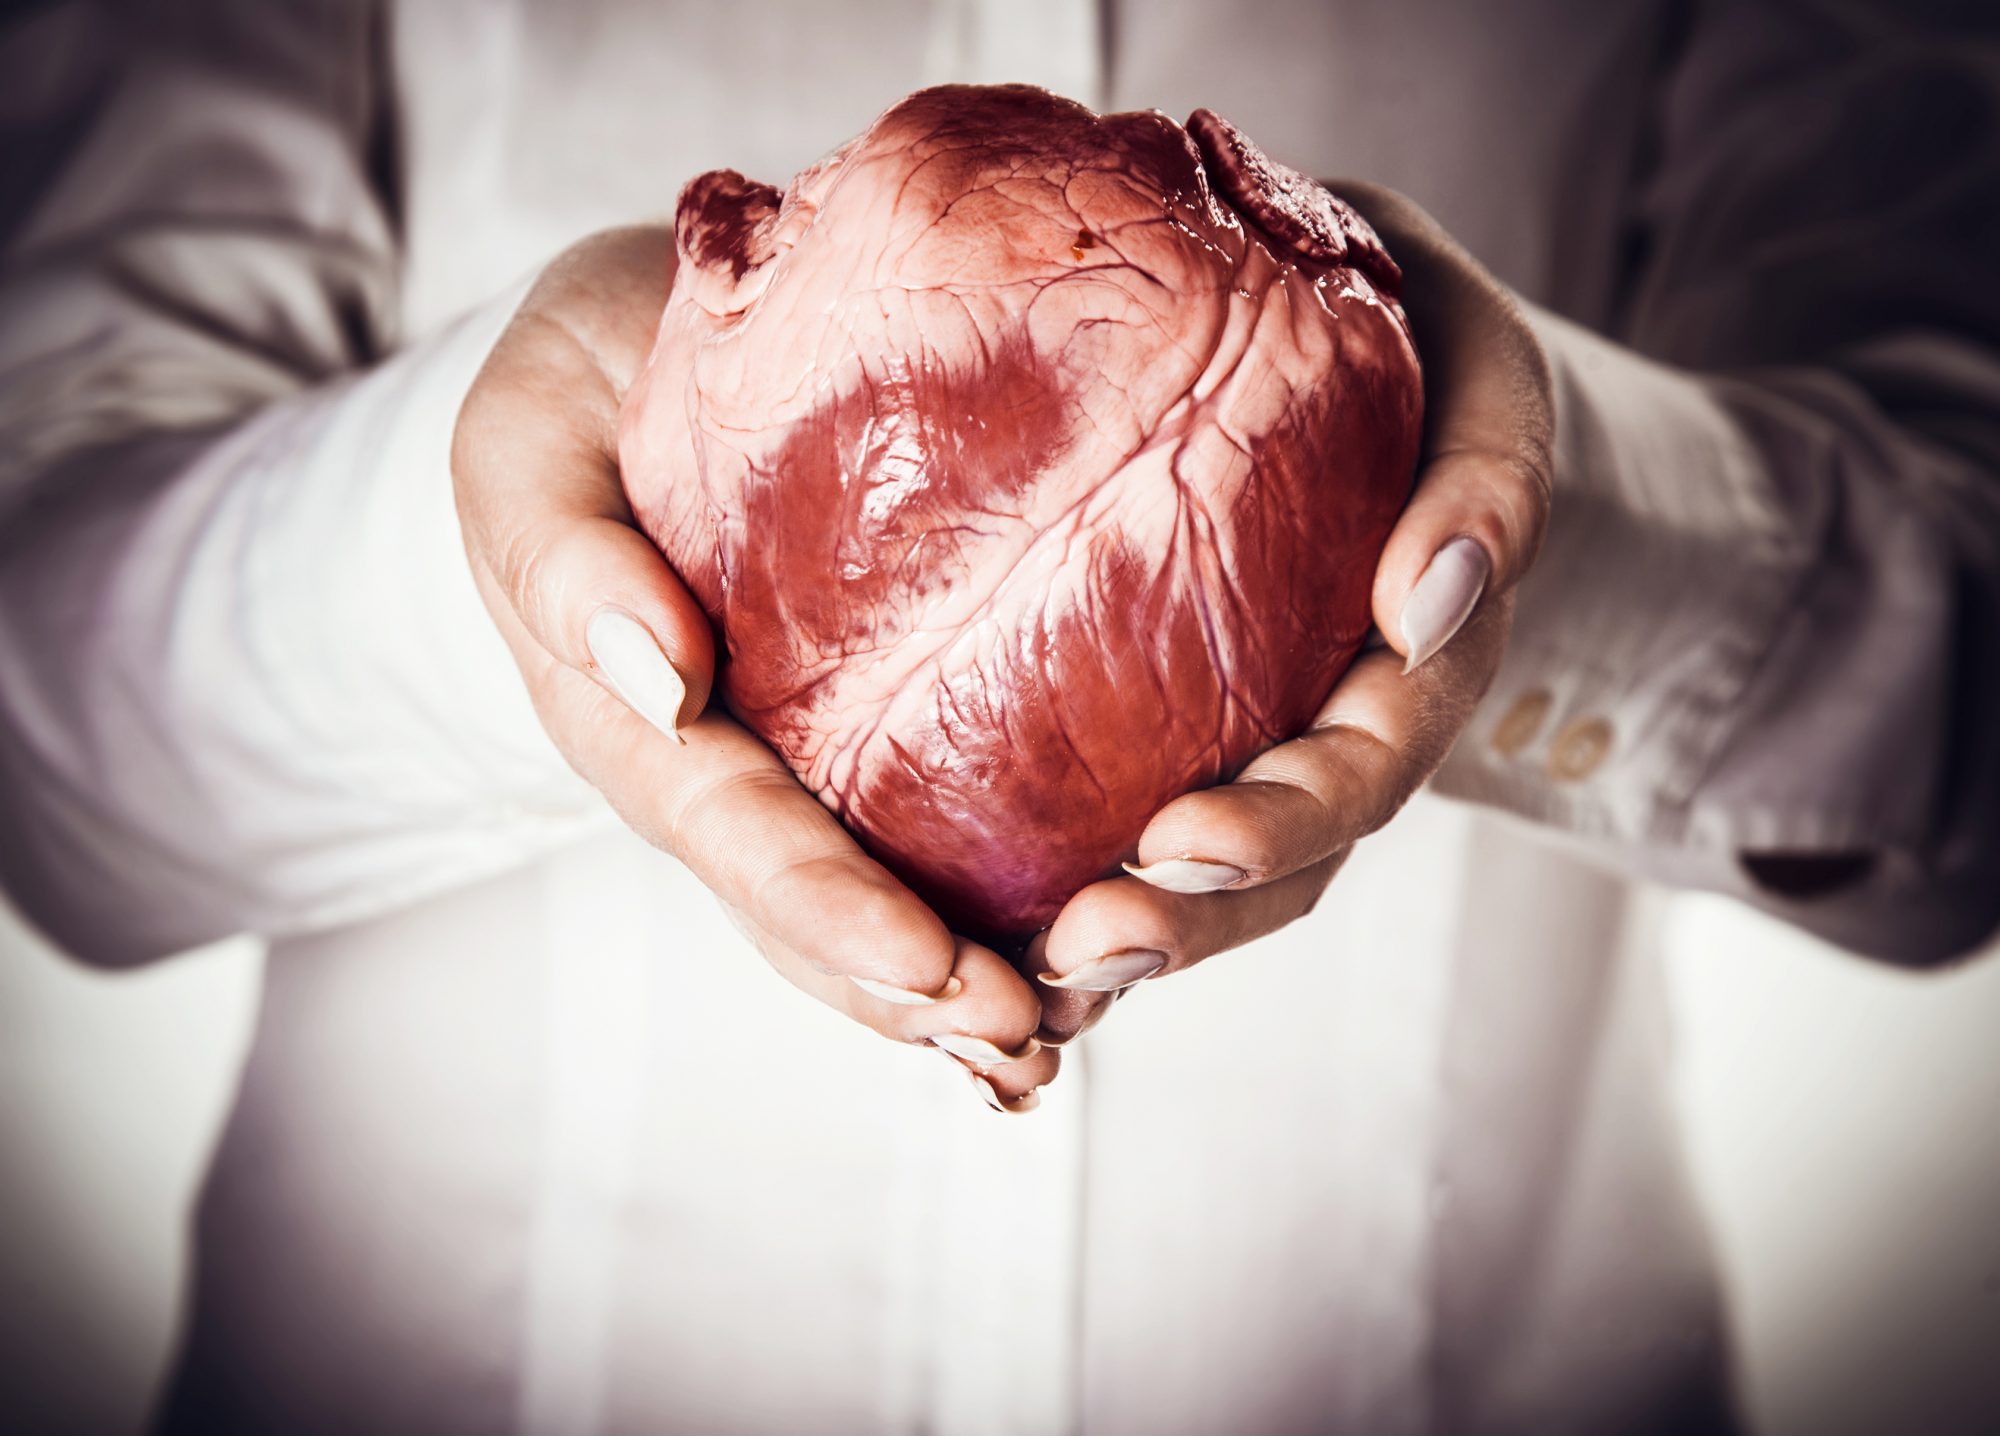 What is the life expectancy after heart transplant by age